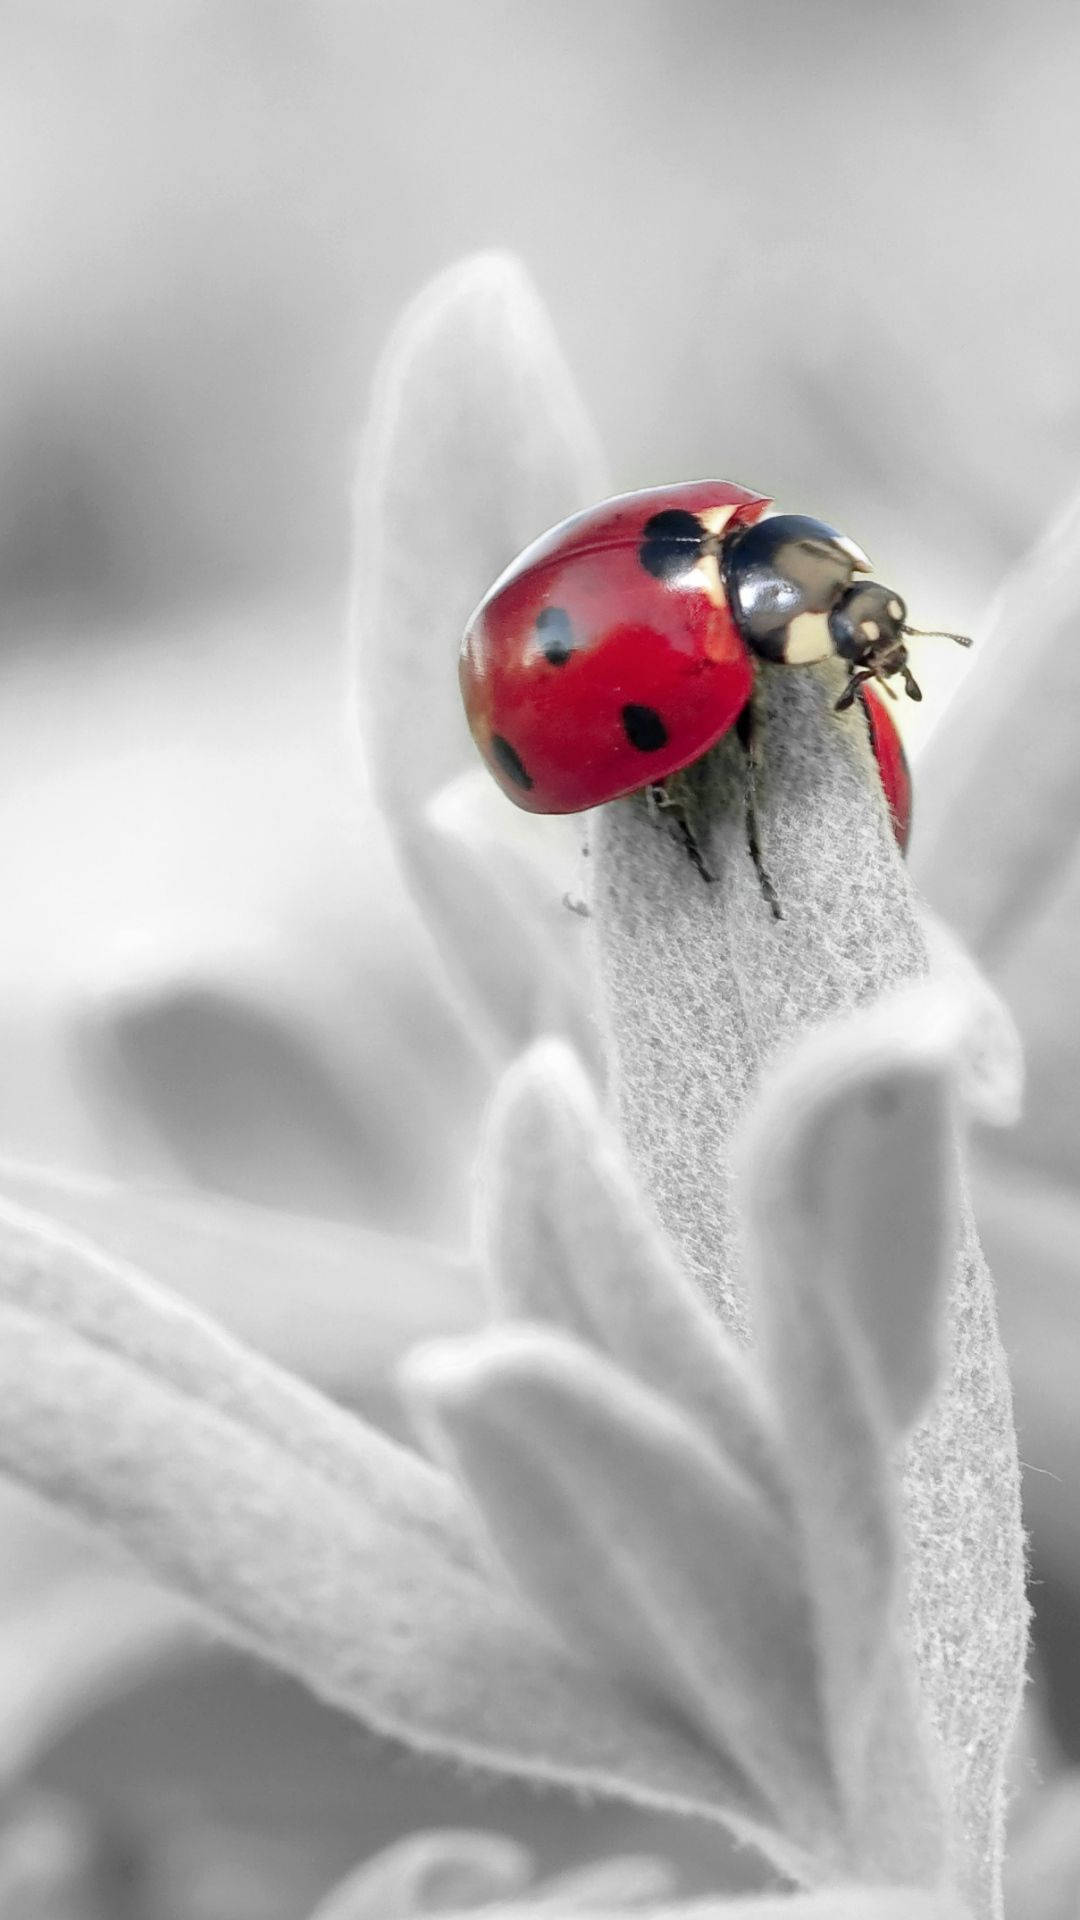 Red Ladybug With Black Dots Background